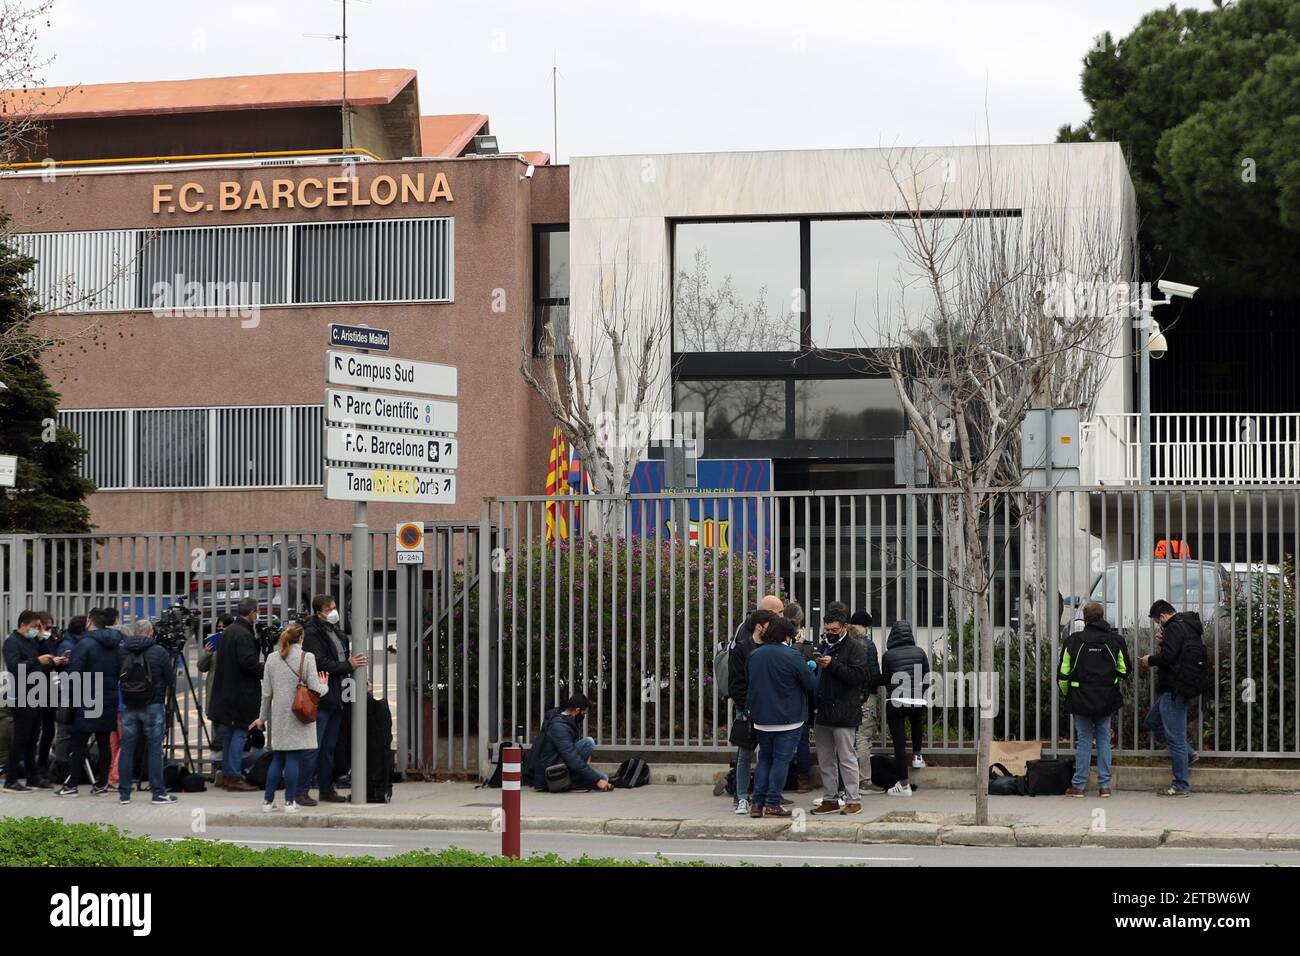 Barcelona, Spain. 1st Mar, 2021. Reporters wait outside the FC Barcelona's office in Barcelona, Spain, on March 1, 2021. Former FC Barcelona President Josep Maria Bartomeu was arrested on Monday morning along with the club's General Manager, Oscar Gray and the former director to the Presidency, Jayme Masferrer as part of an investigation into a corruption scandal. Credit: Joan Gosa/Xinhua/Alamy Live News Stock Photo